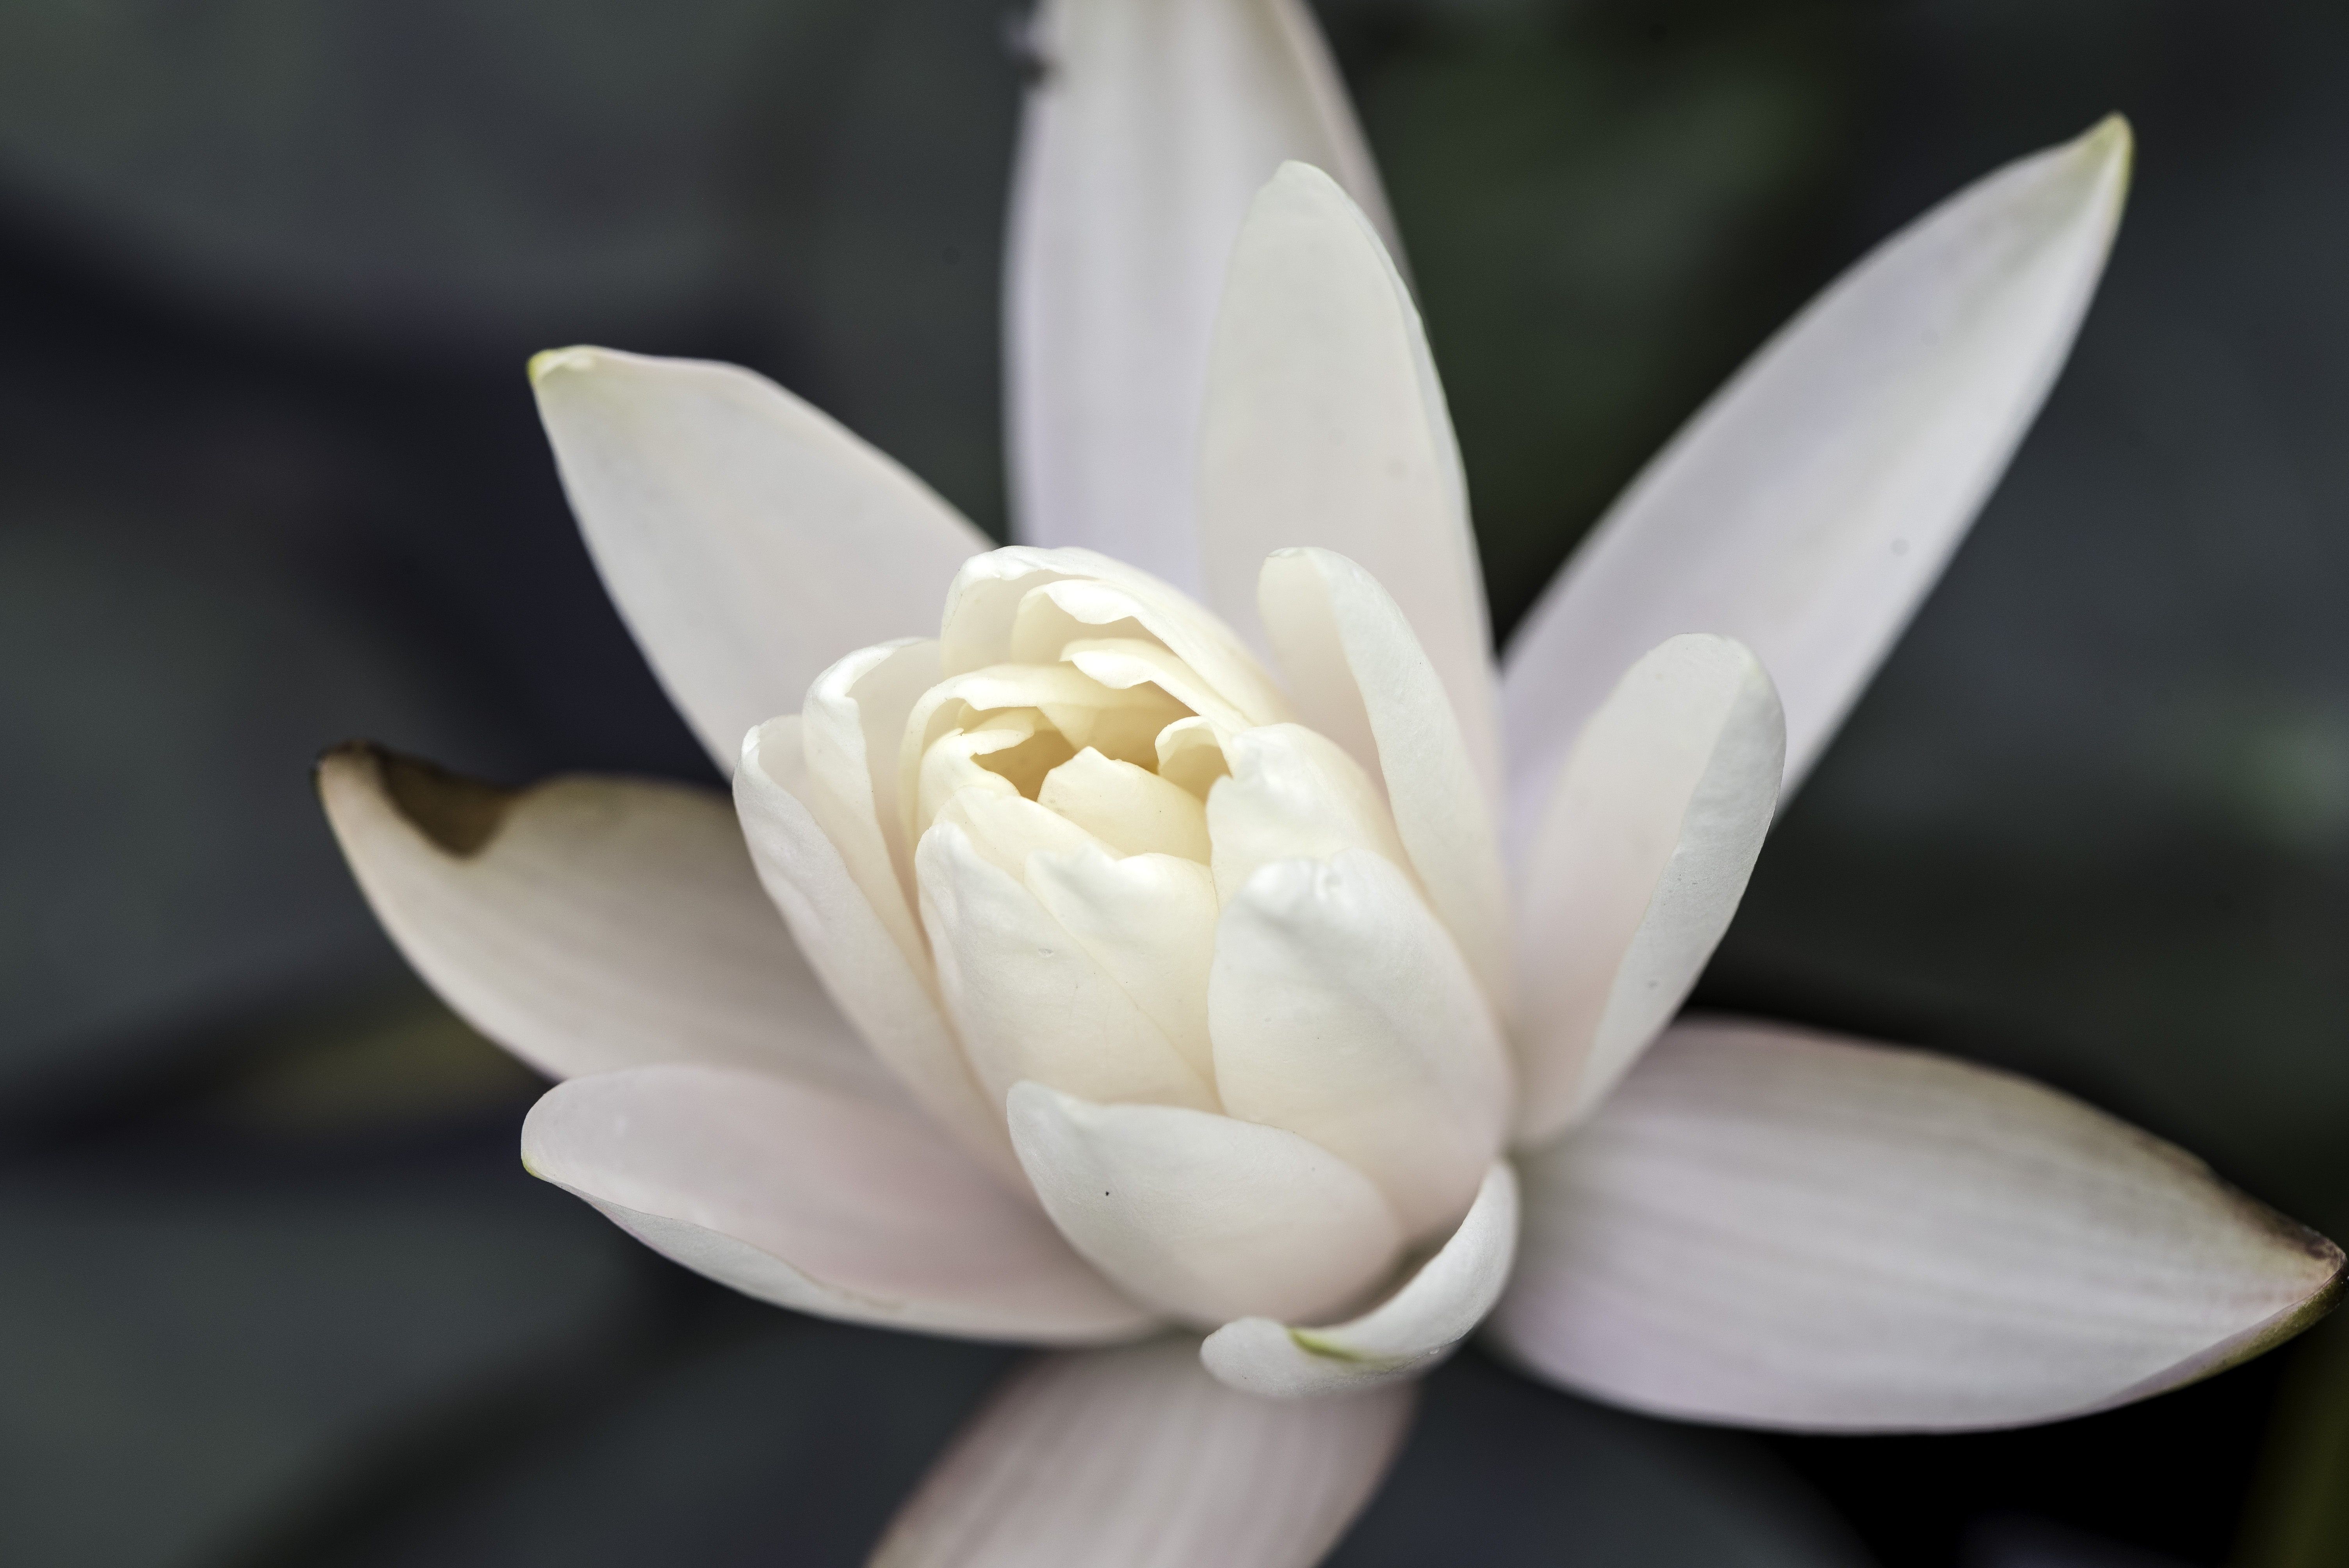 White Flower petals in a blooming flower image - Free stock photo ...